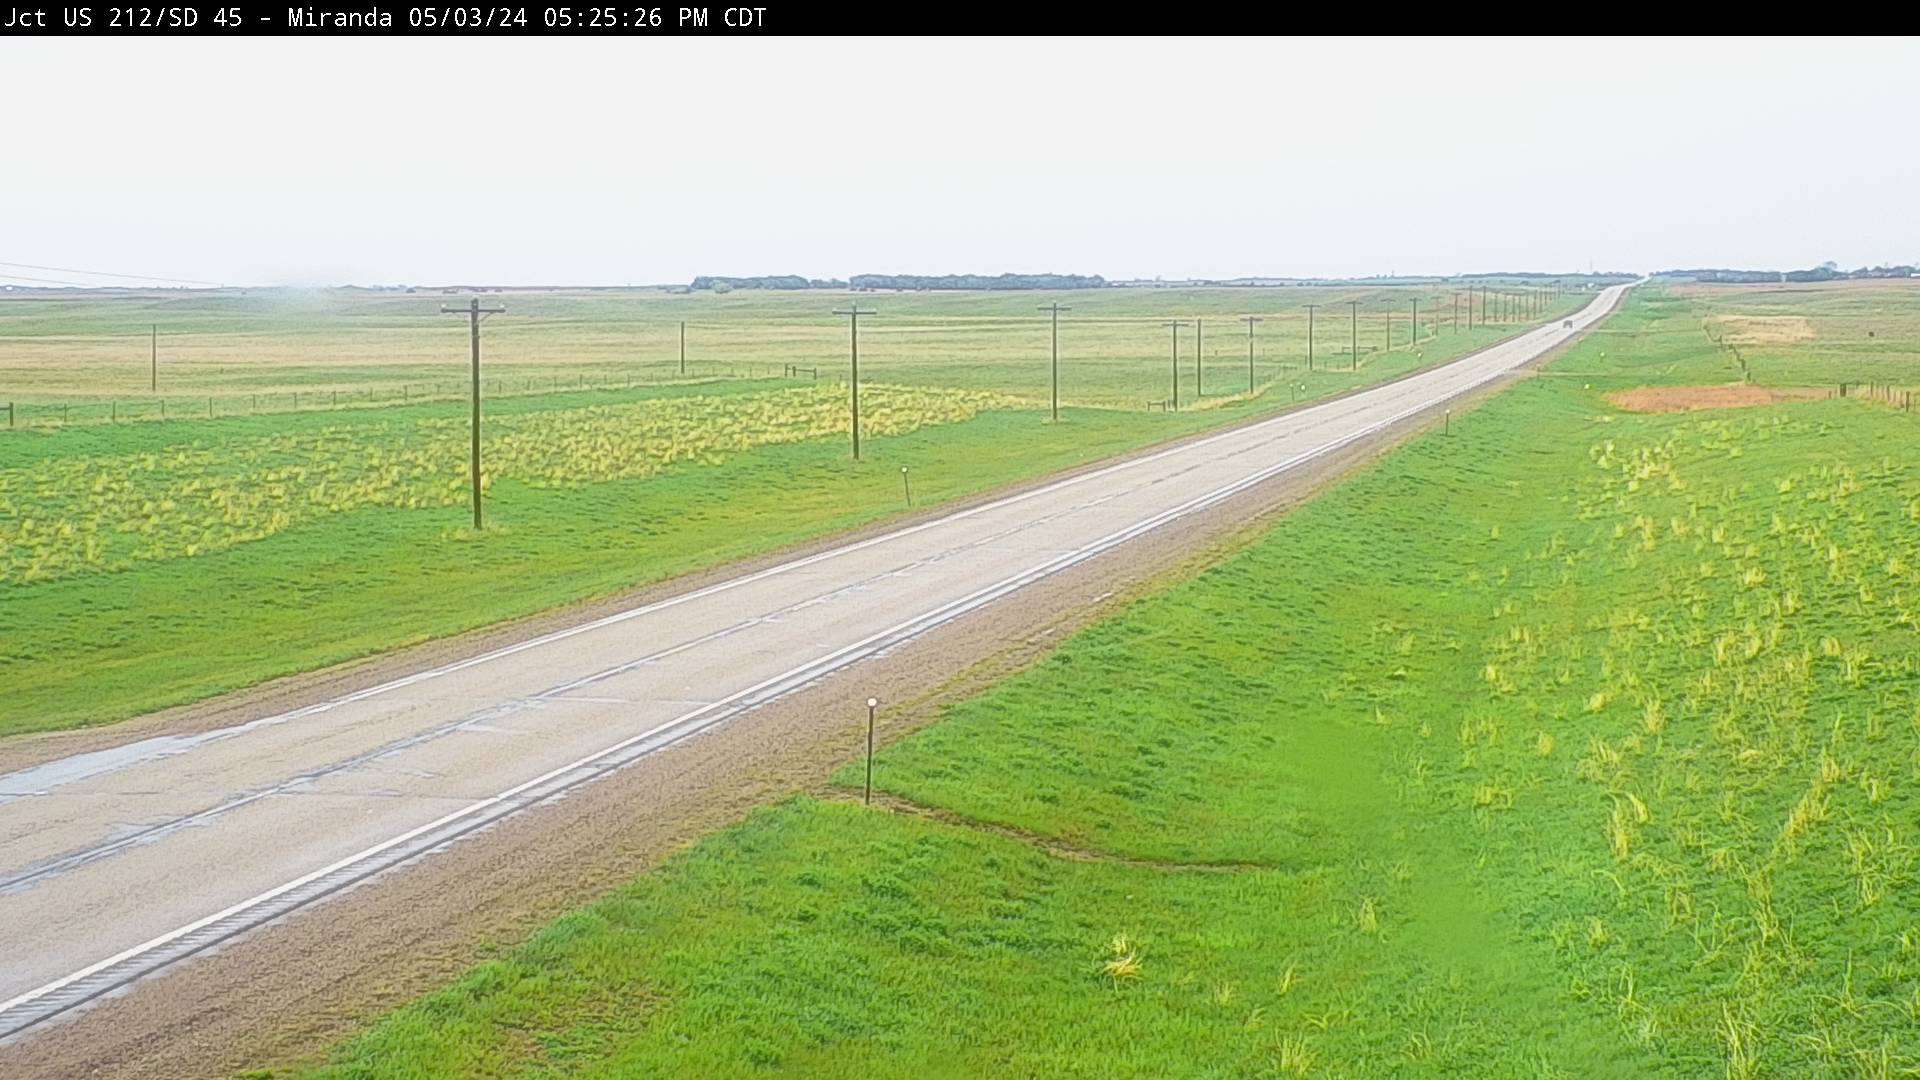 5 miles south of town at junction US-212 & SD-45 - East Traffic Camera